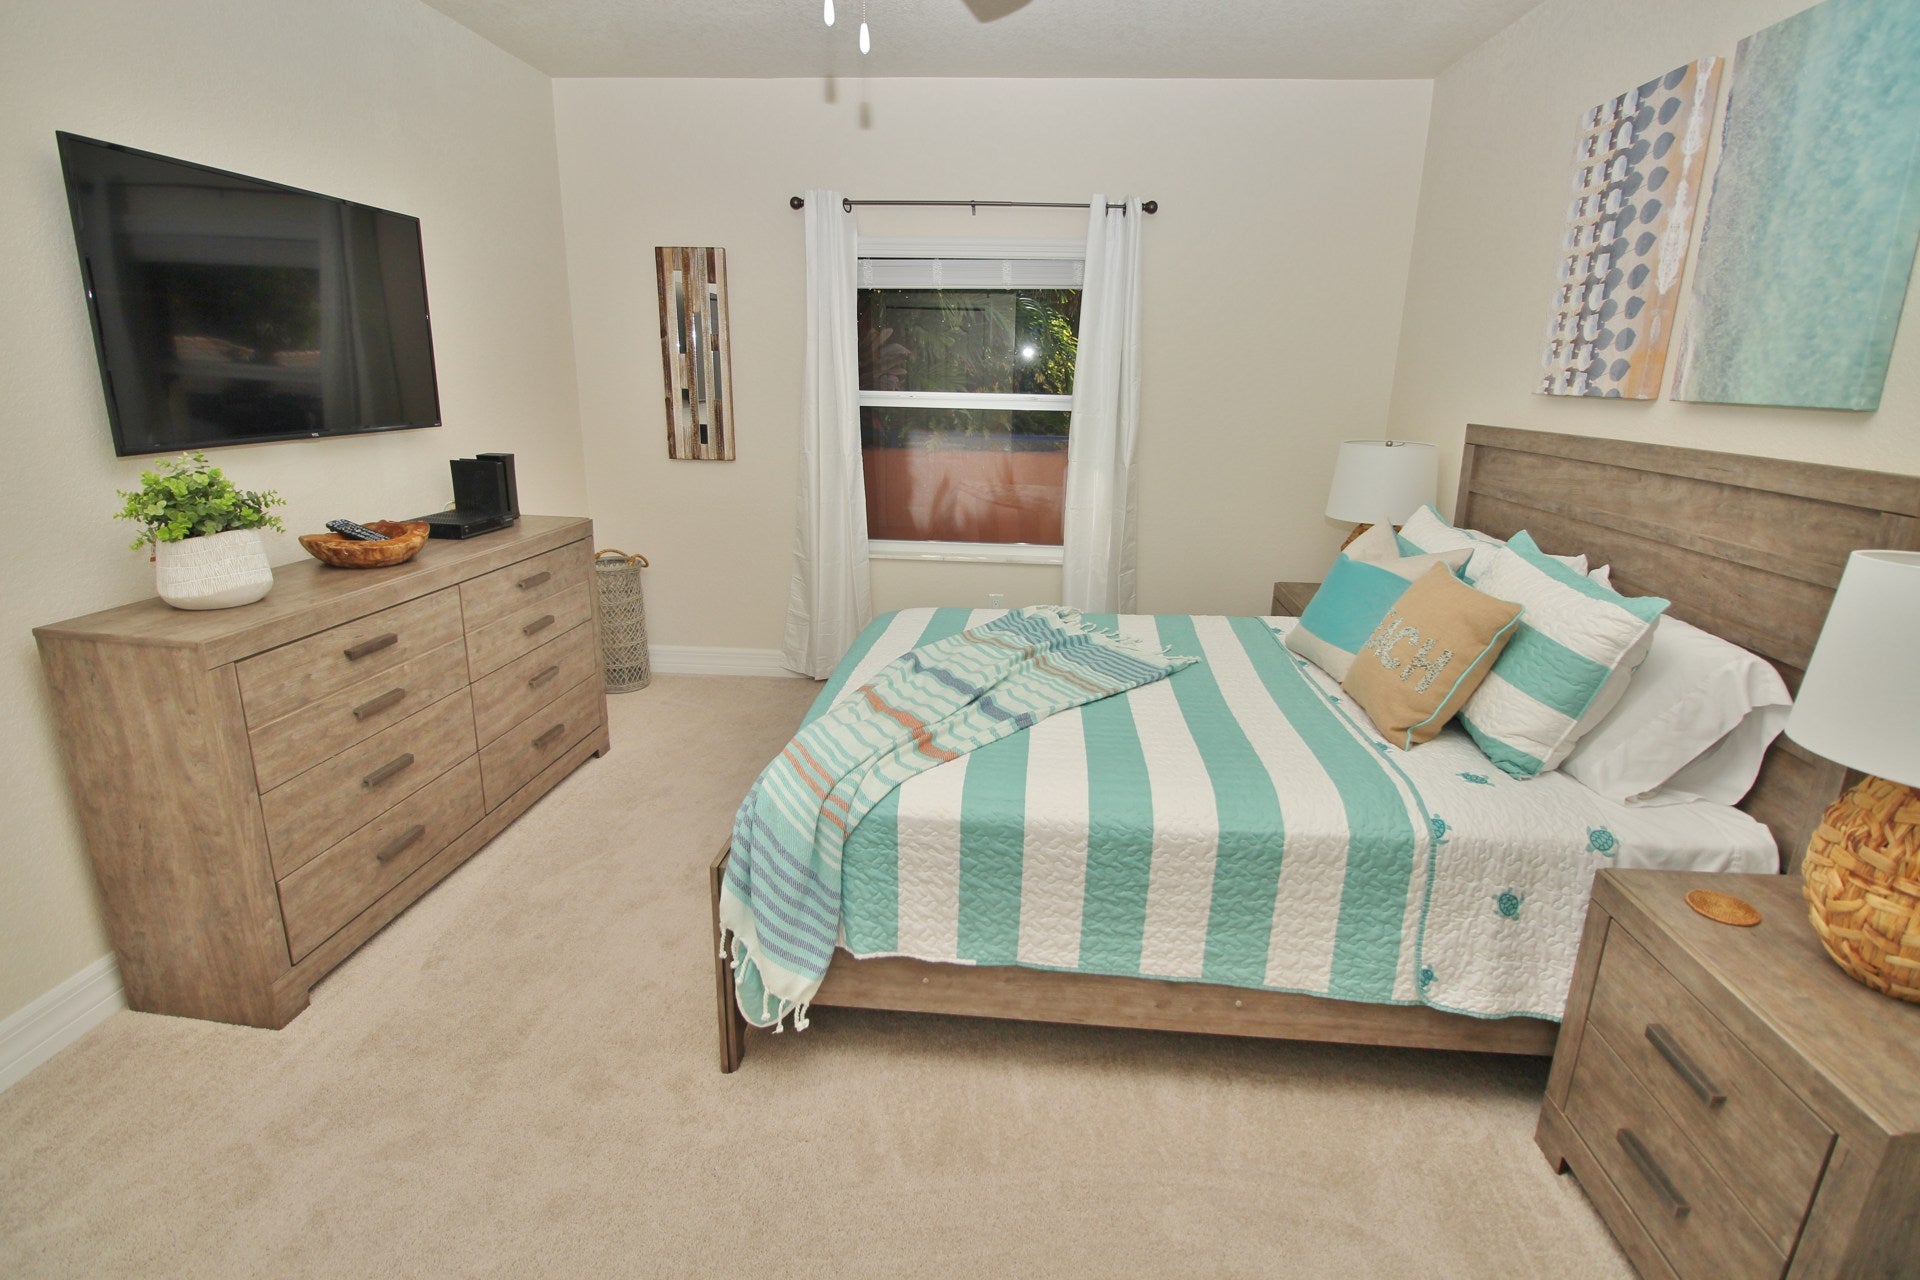 Second bedroom with teal hues